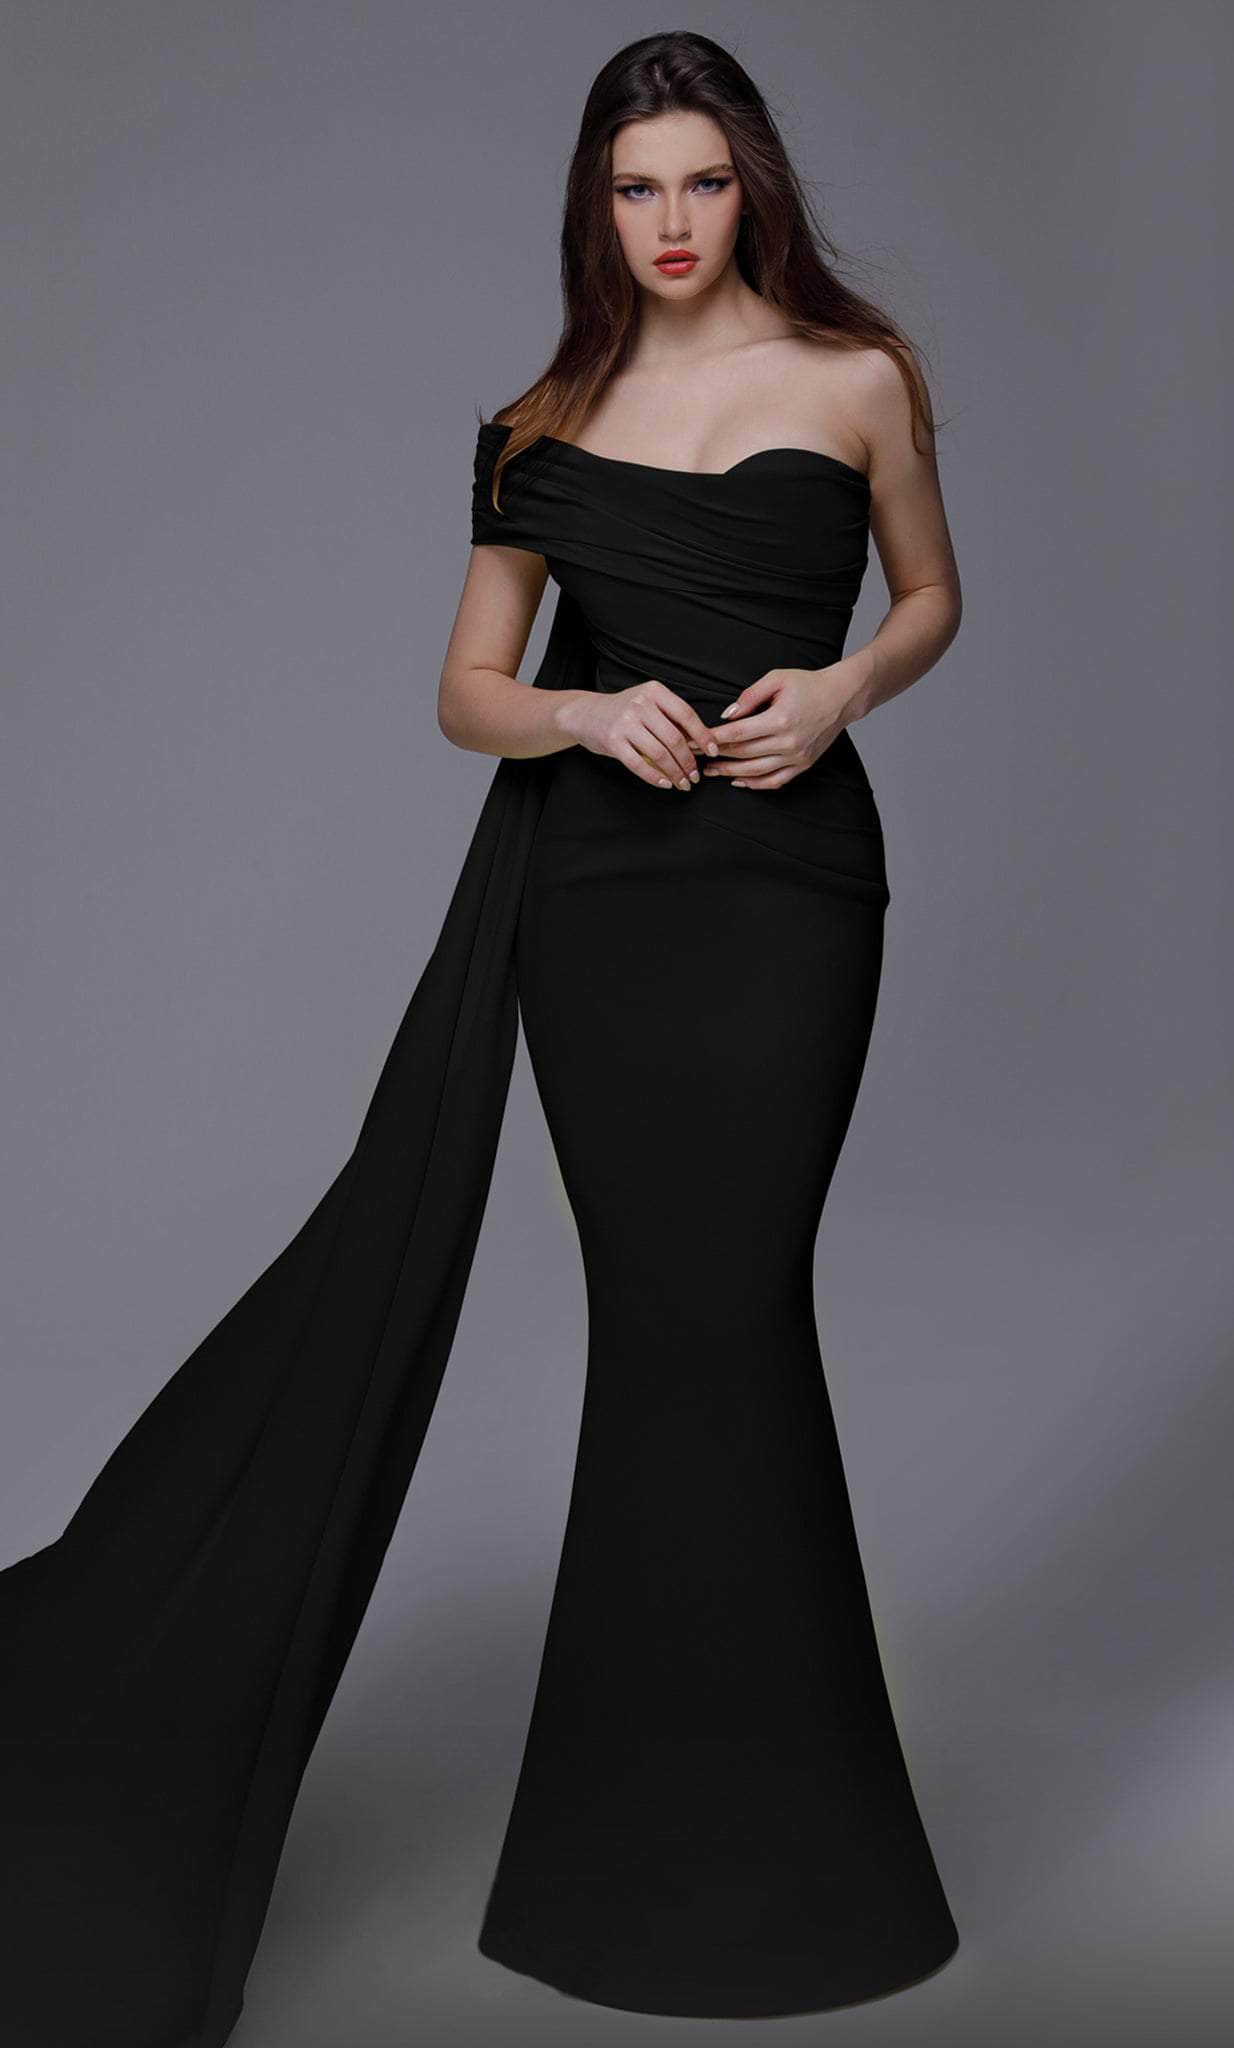 MNM Couture 2718 - Ruched One Shoulder Evening Gown
